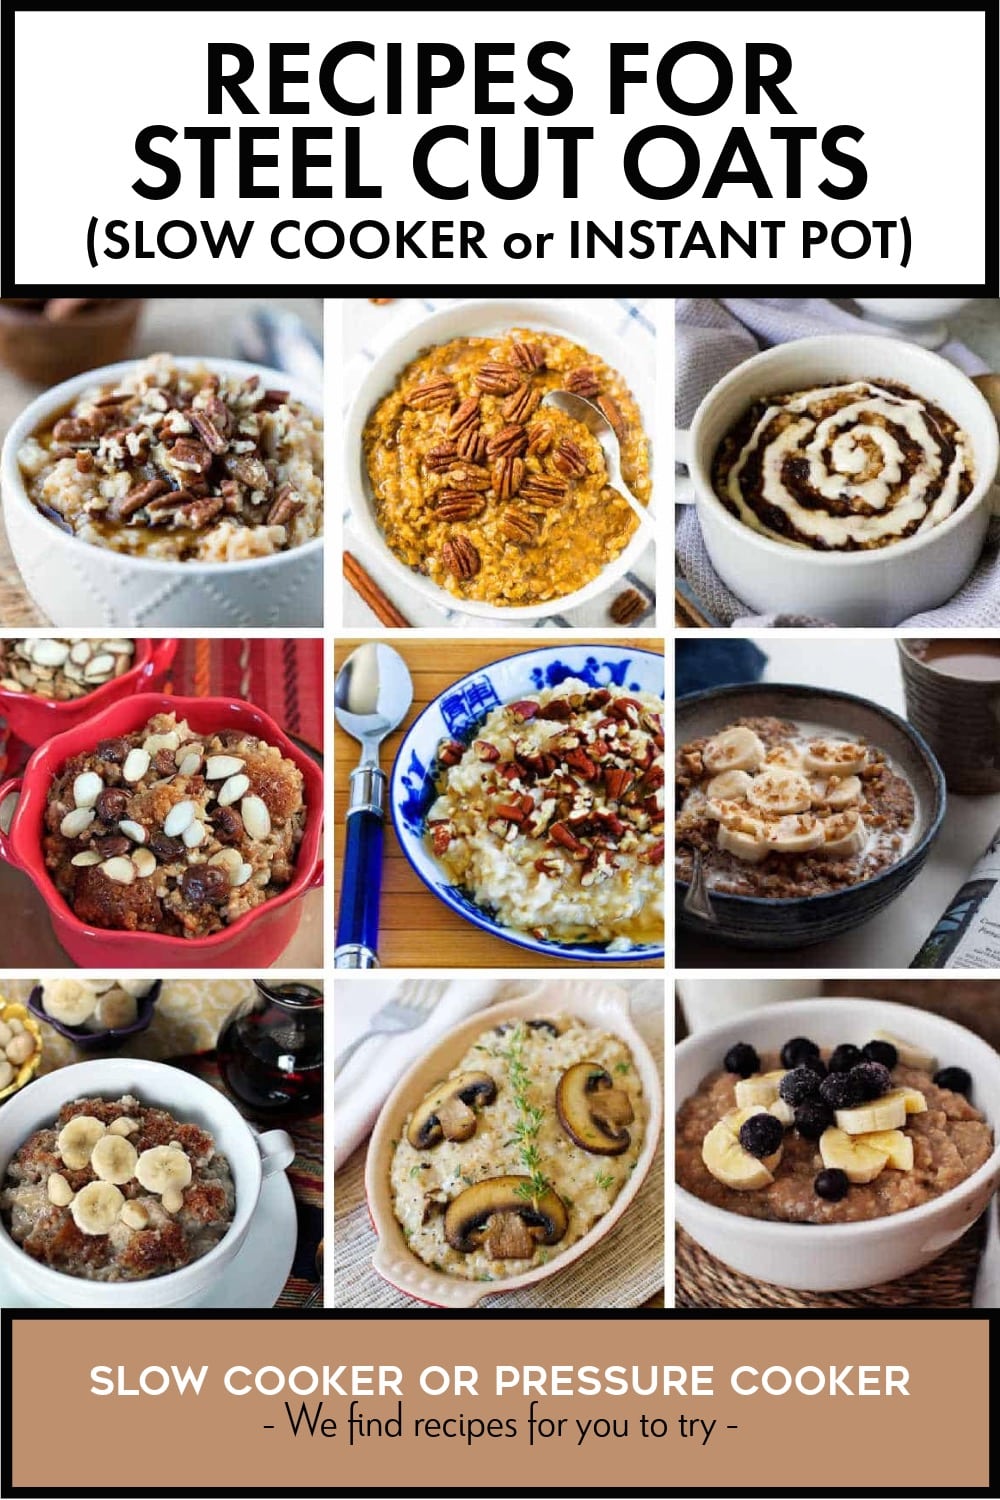 Pinterest image of Recipes for Steel Cut Oats (Slow Cooker or Instant Pot)